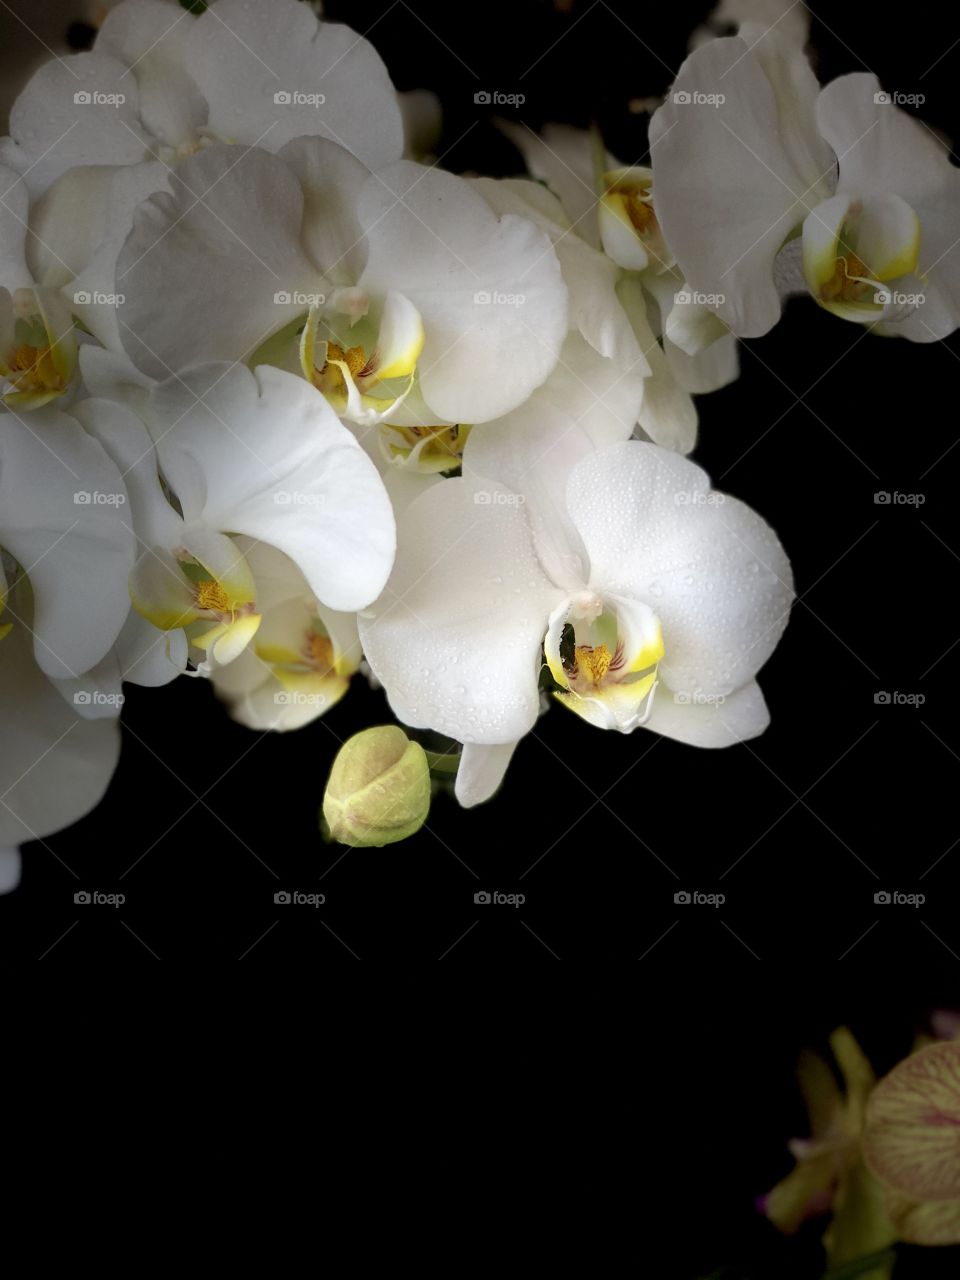 White Orchids Lifestyle Photography! From my Garden to You😘